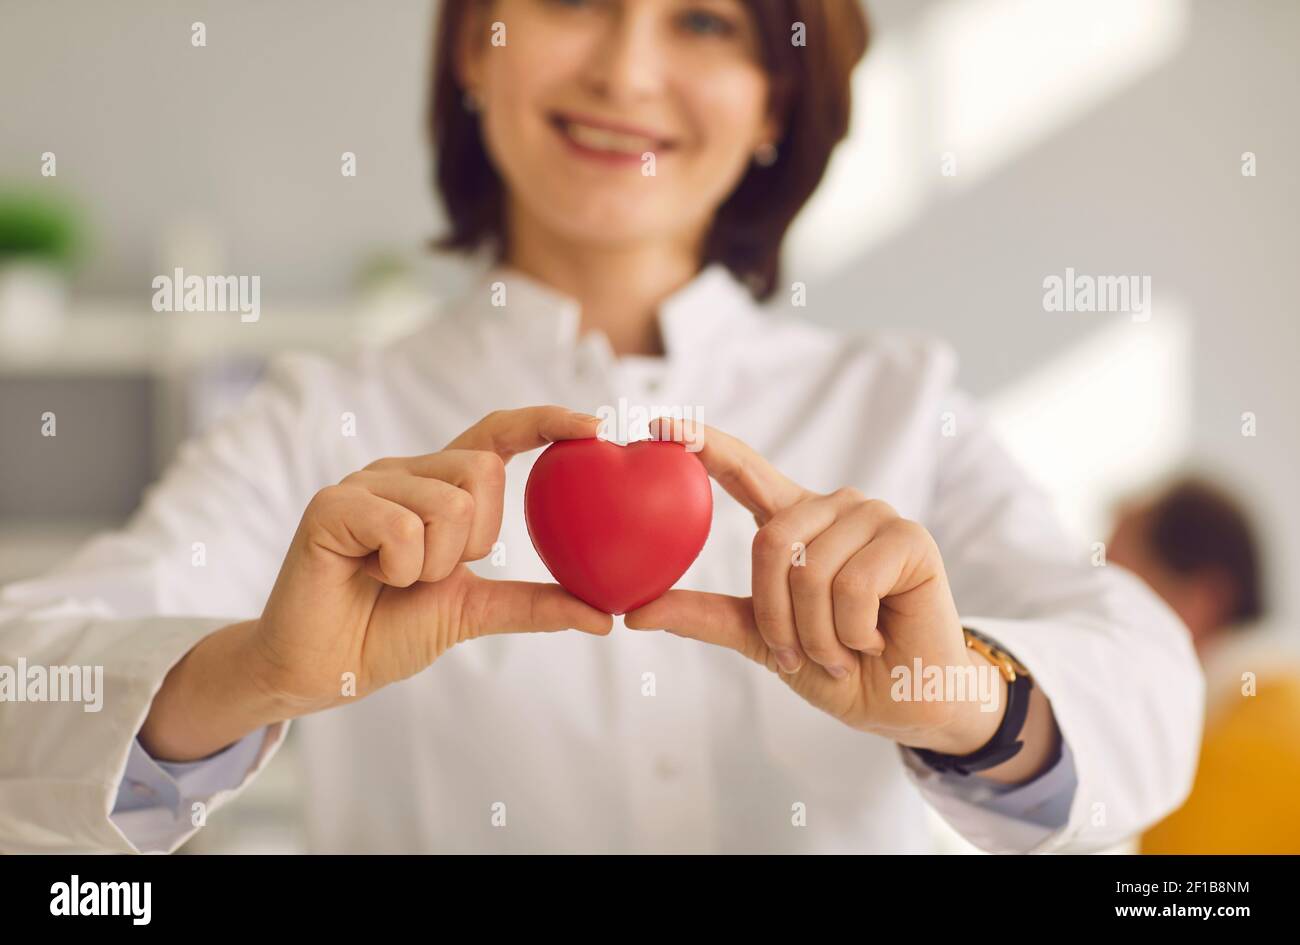 Heart symbol in hand of smiling female doctor cardiologist with stethoscope Stock Photo